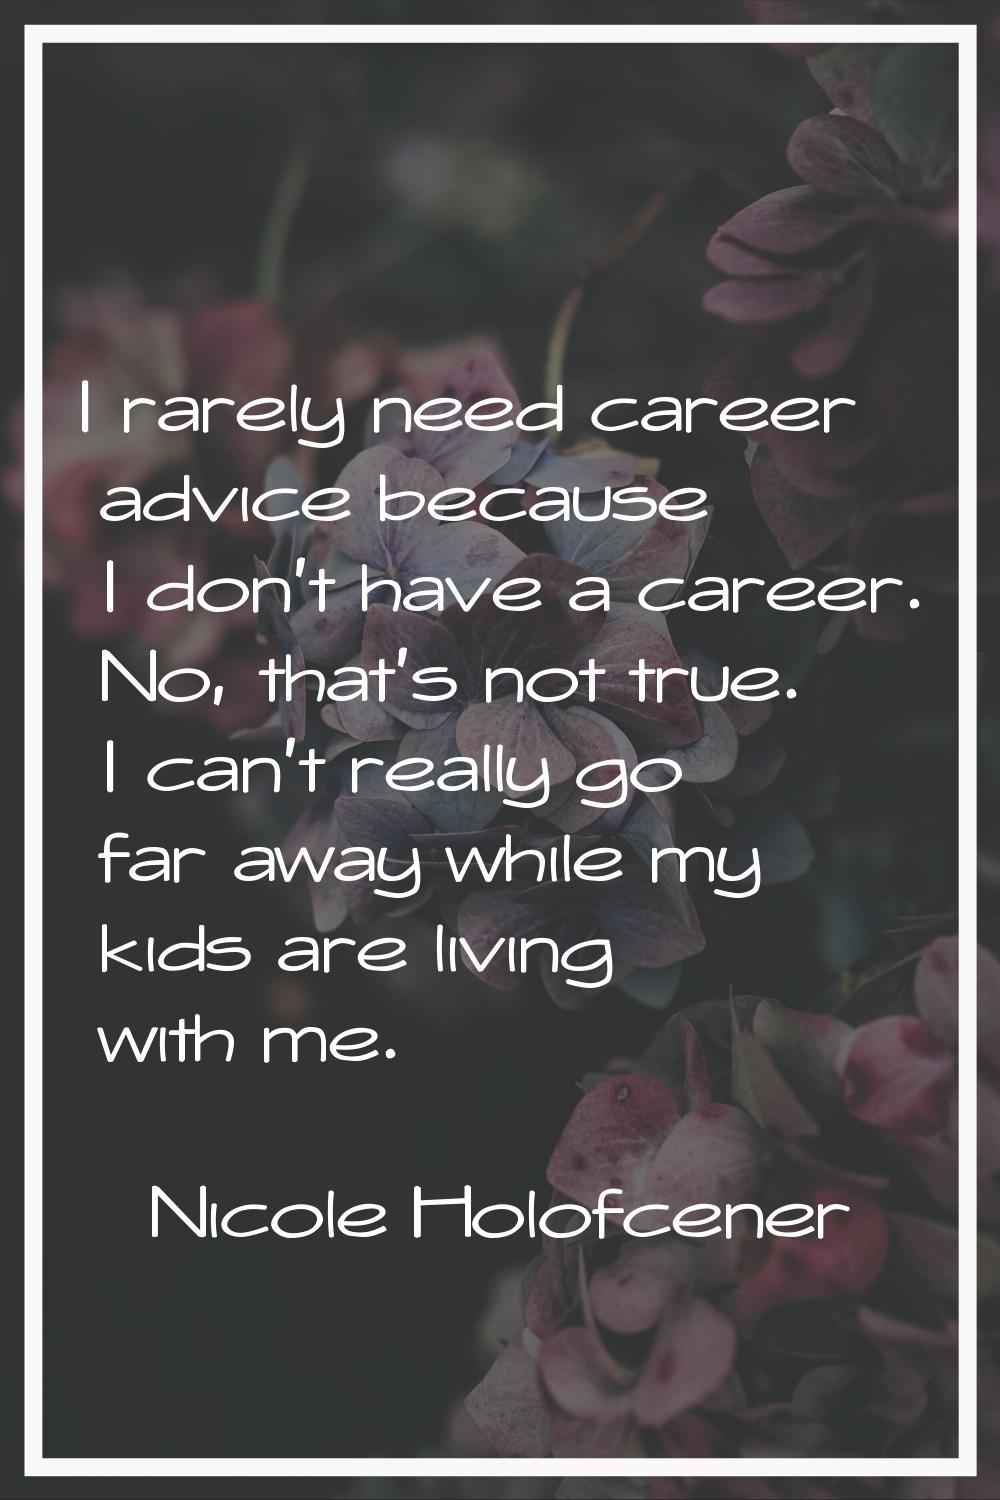 I rarely need career advice because I don't have a career. No, that's not true. I can't really go f